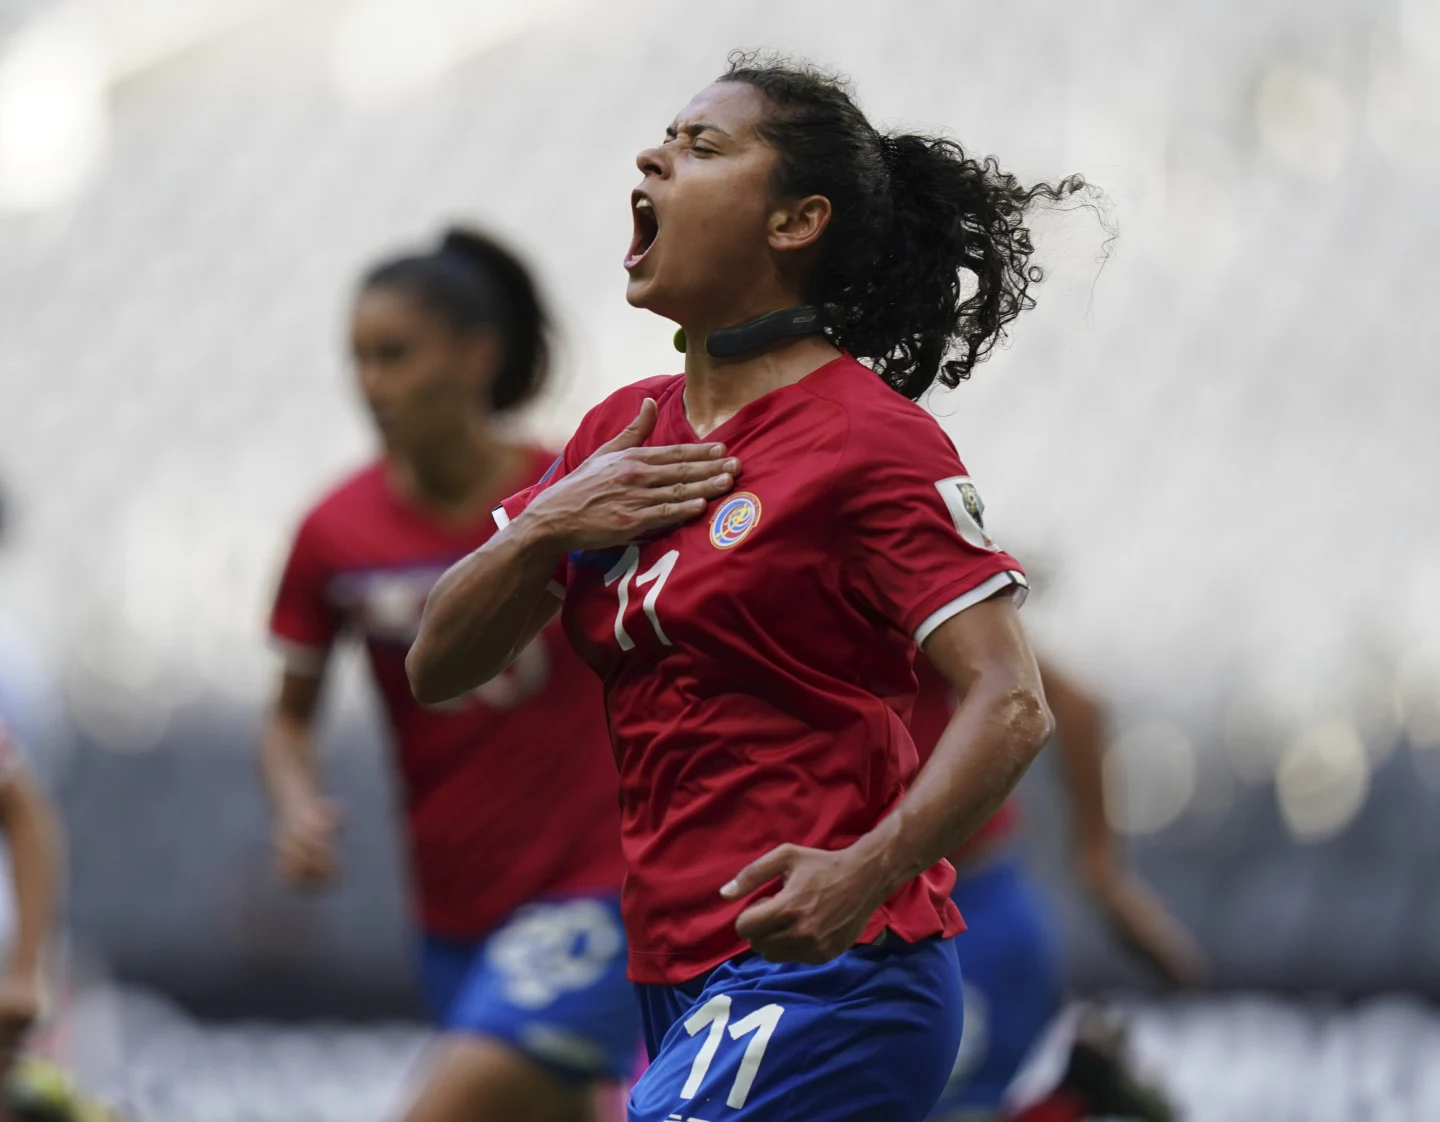 Parity, bigger field mean there could be surprises at the Women’s World Cup